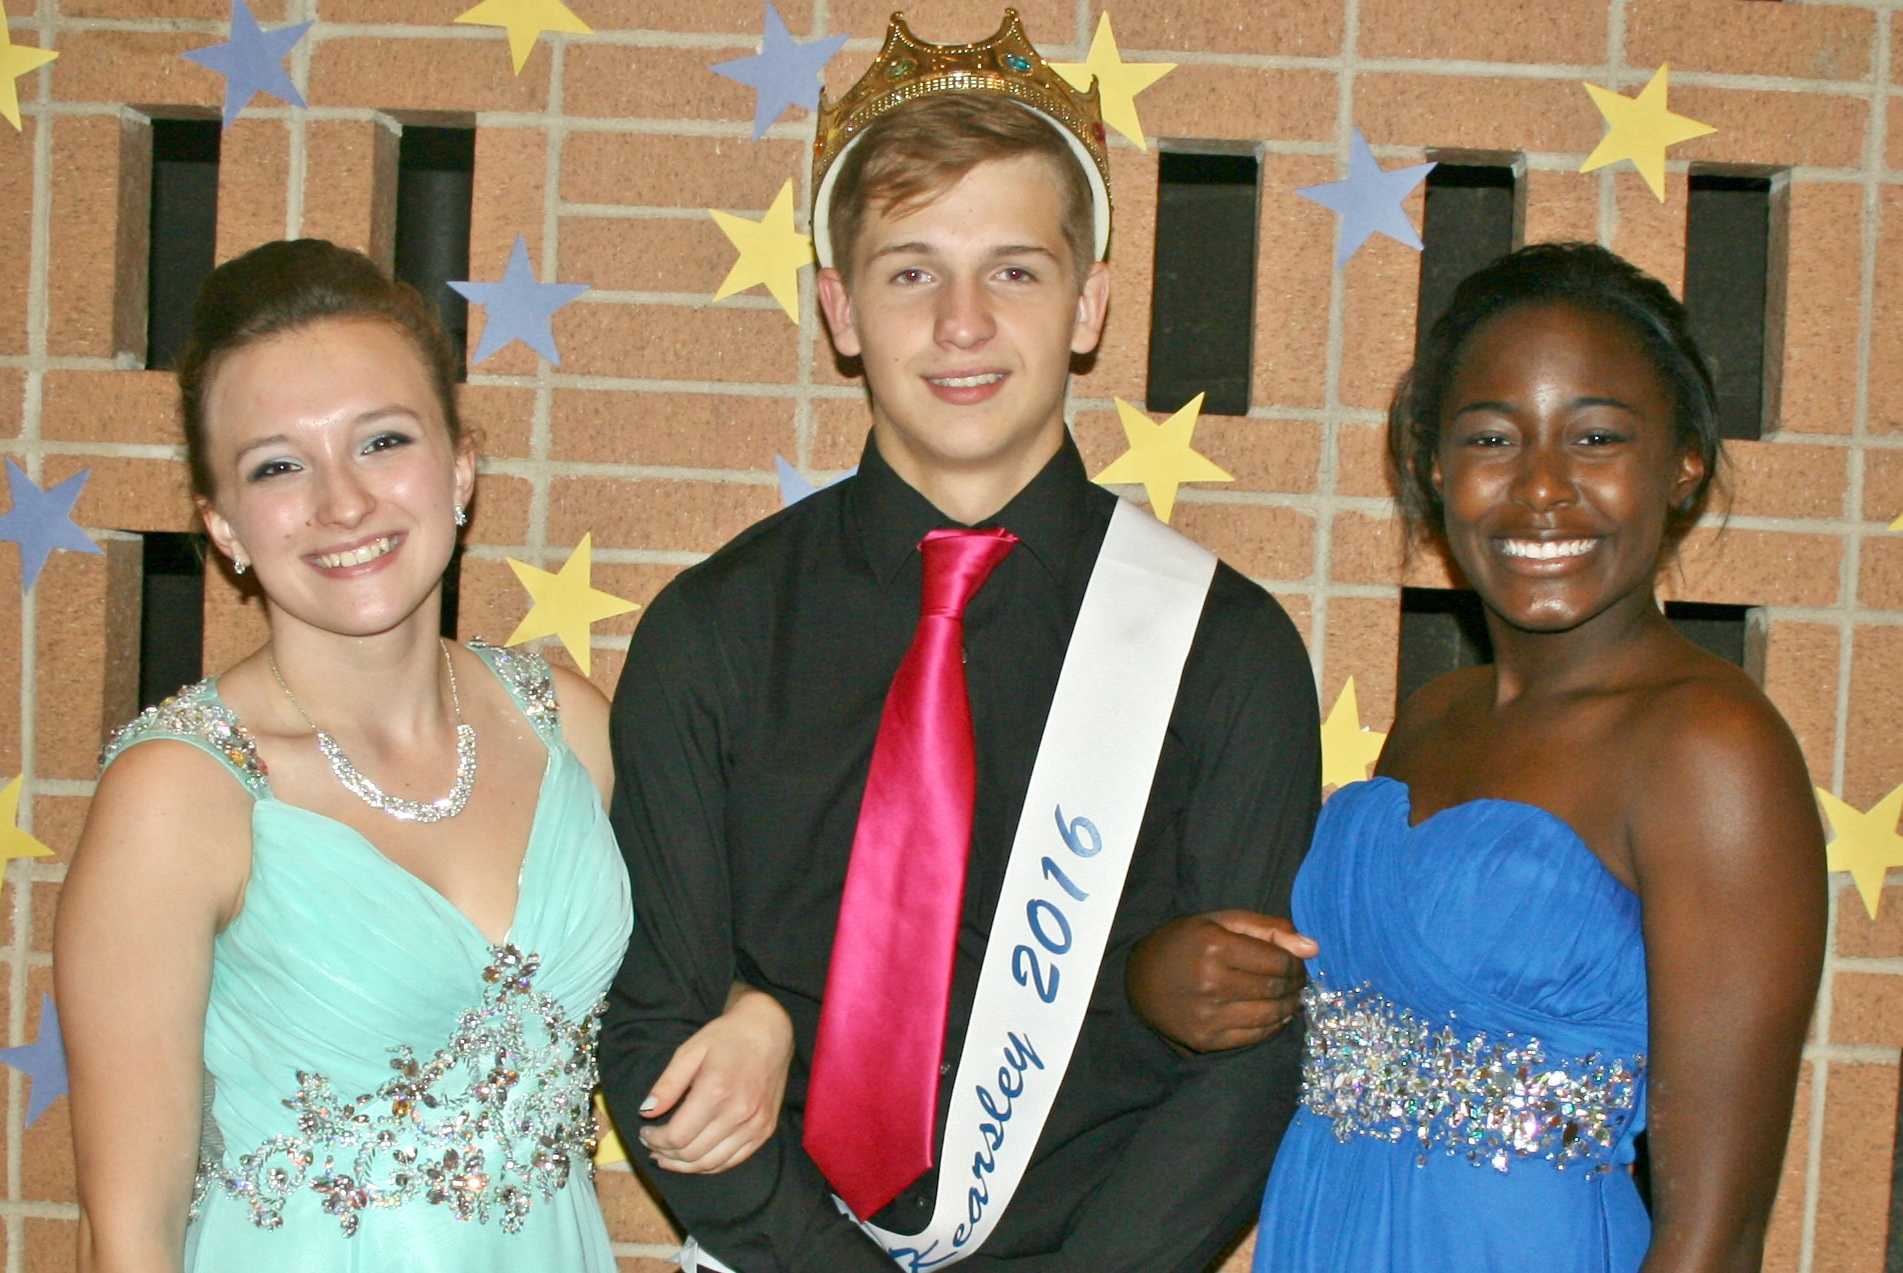 Senior Sadie Saunders (left) and junior Kaylie Hill (right) present Mr. Kearsley 2016, junior Sebastian Young, at the talent show hosted by the cheer team Wednesday, Oct. 12.